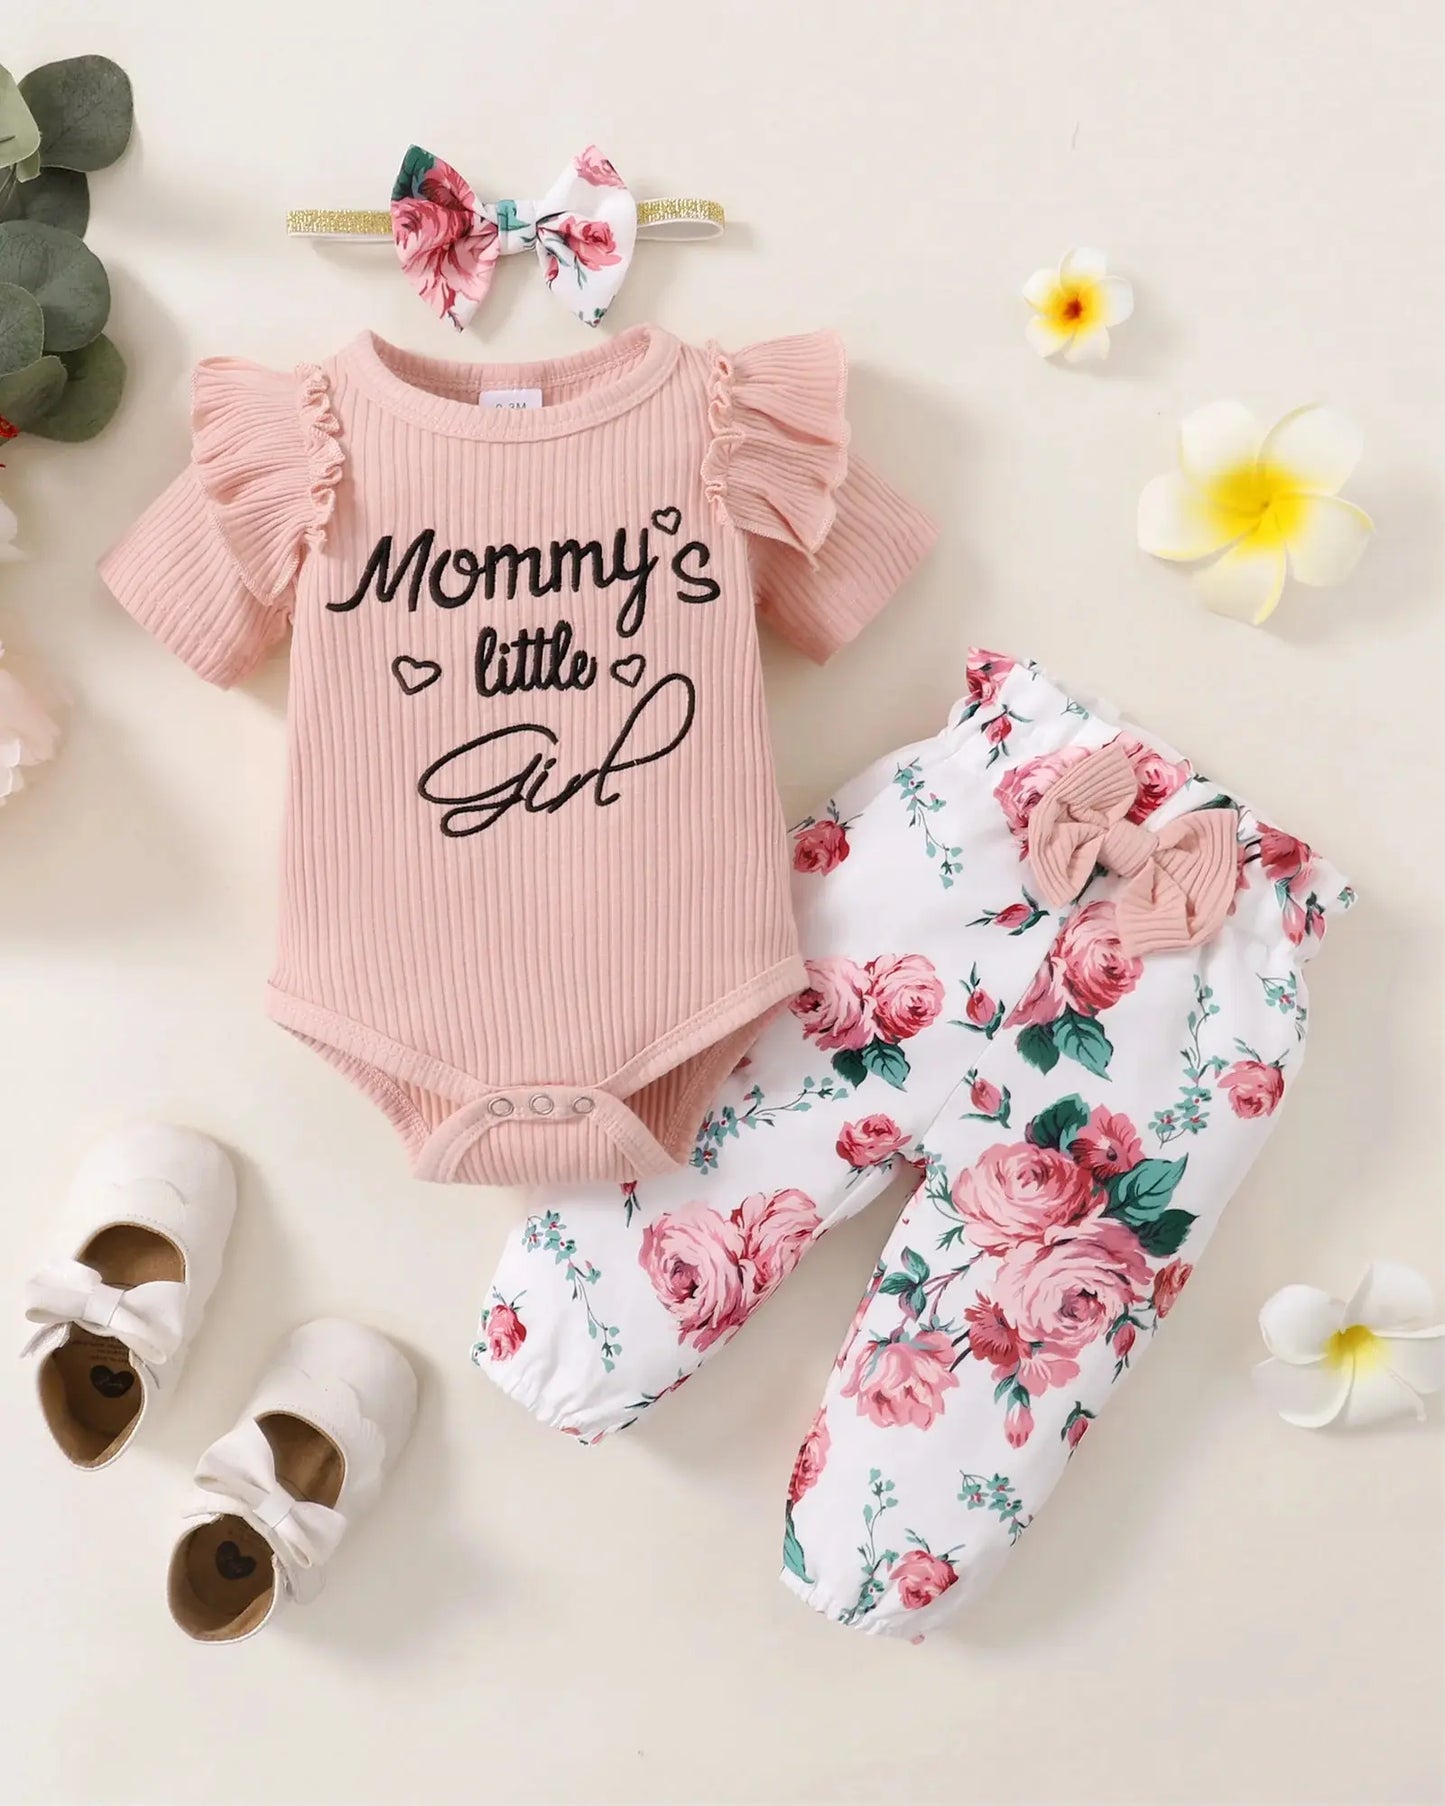 Newborn Baby Girl 3PCS Clothes Set Mommy's Little Girl Short Sleeve Romper+Flowers Pant+Headband Summer Outfit for 0-18 Months